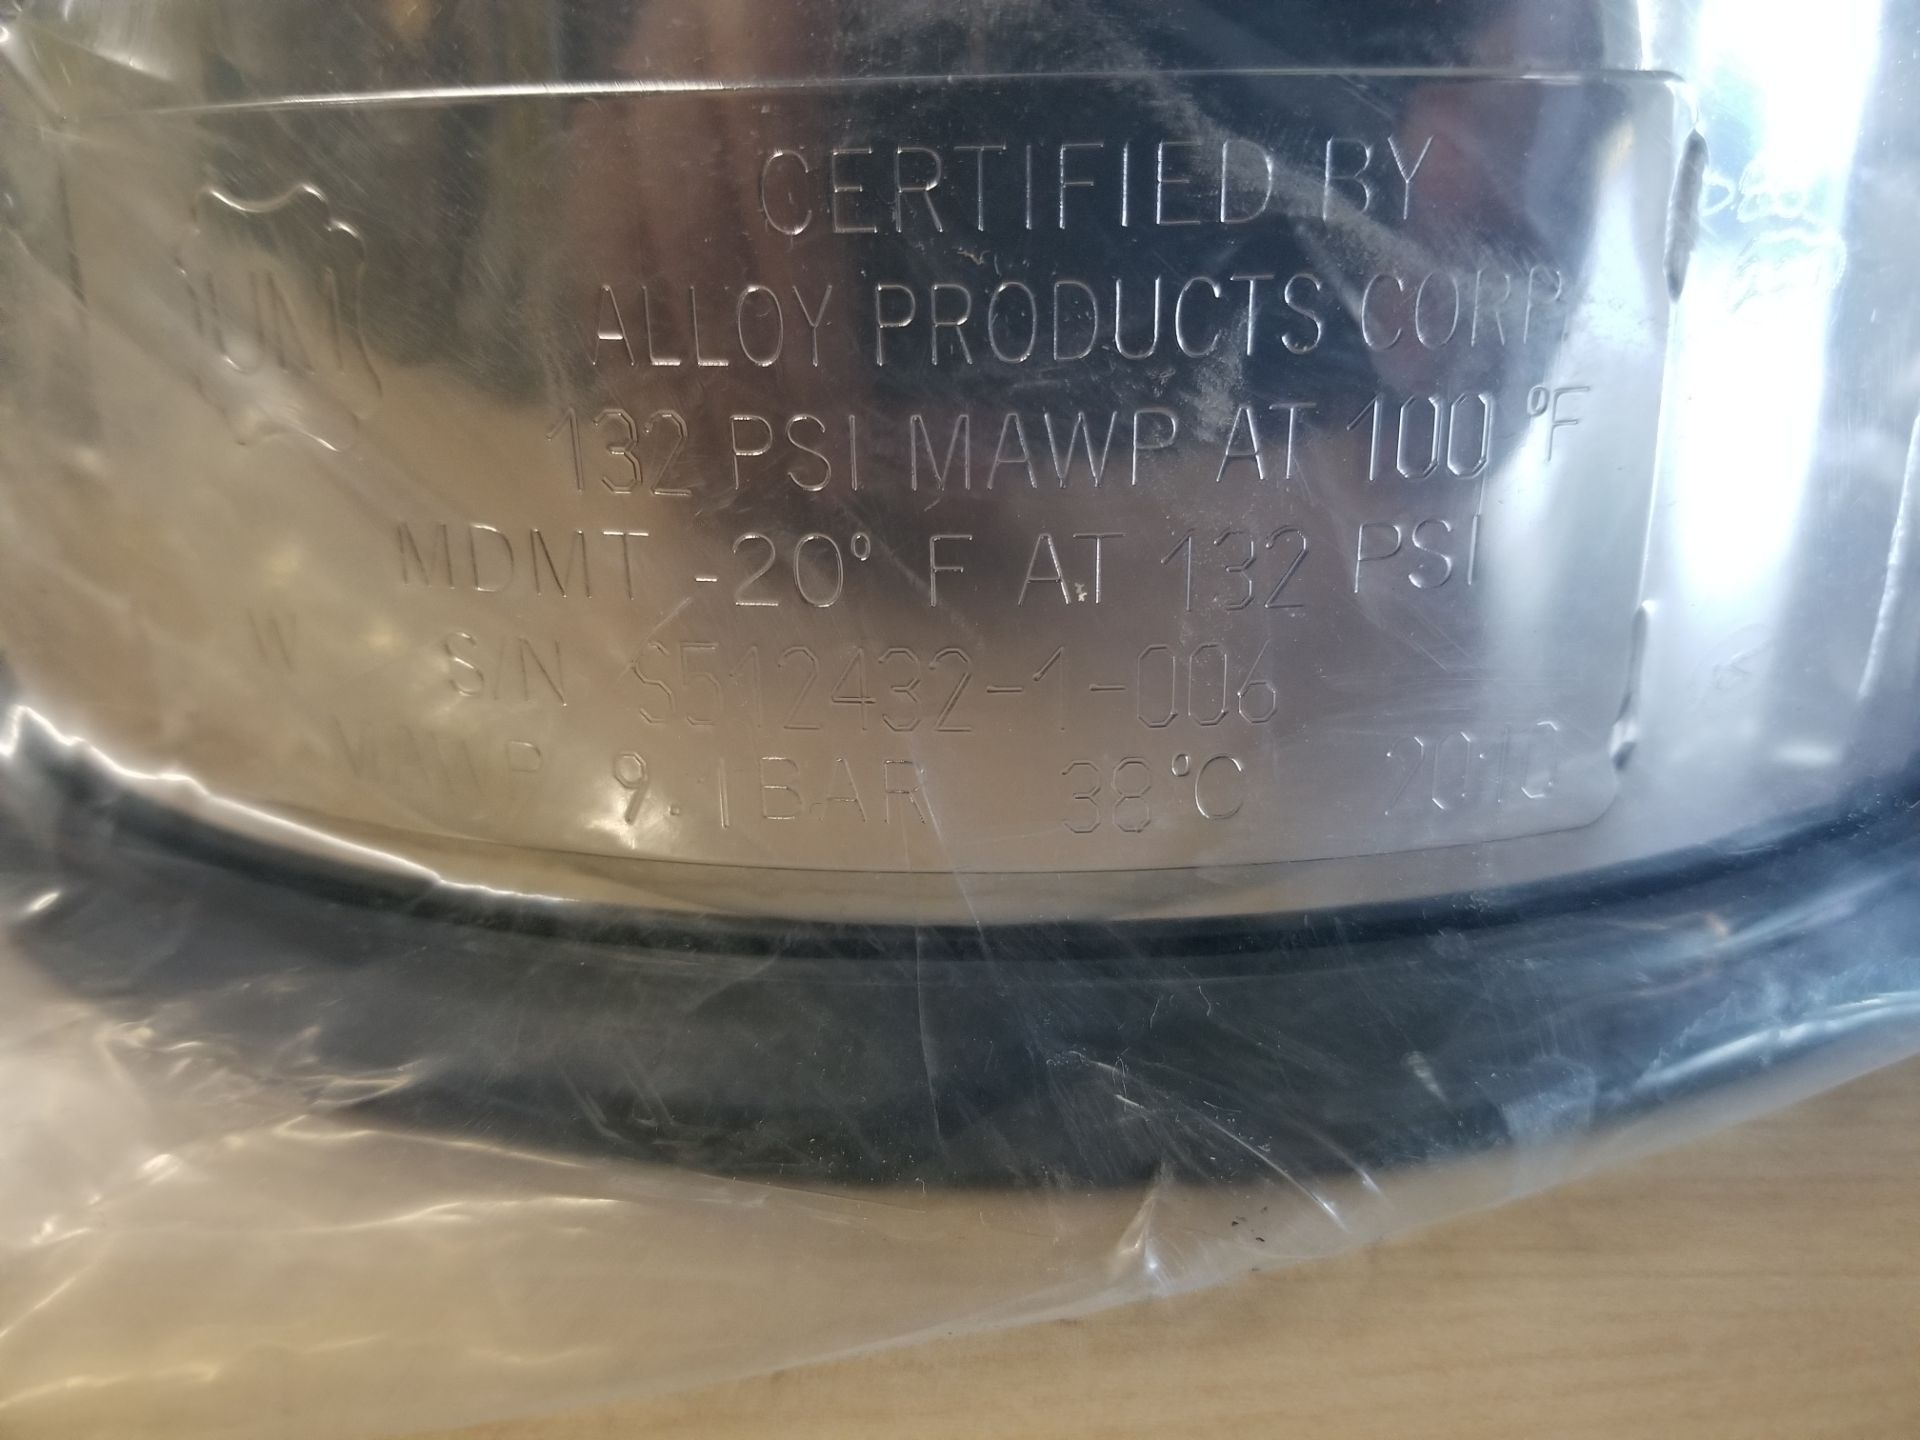 New Alloy Products 316L Stainless Steel Pressure Vessel - Image 7 of 12